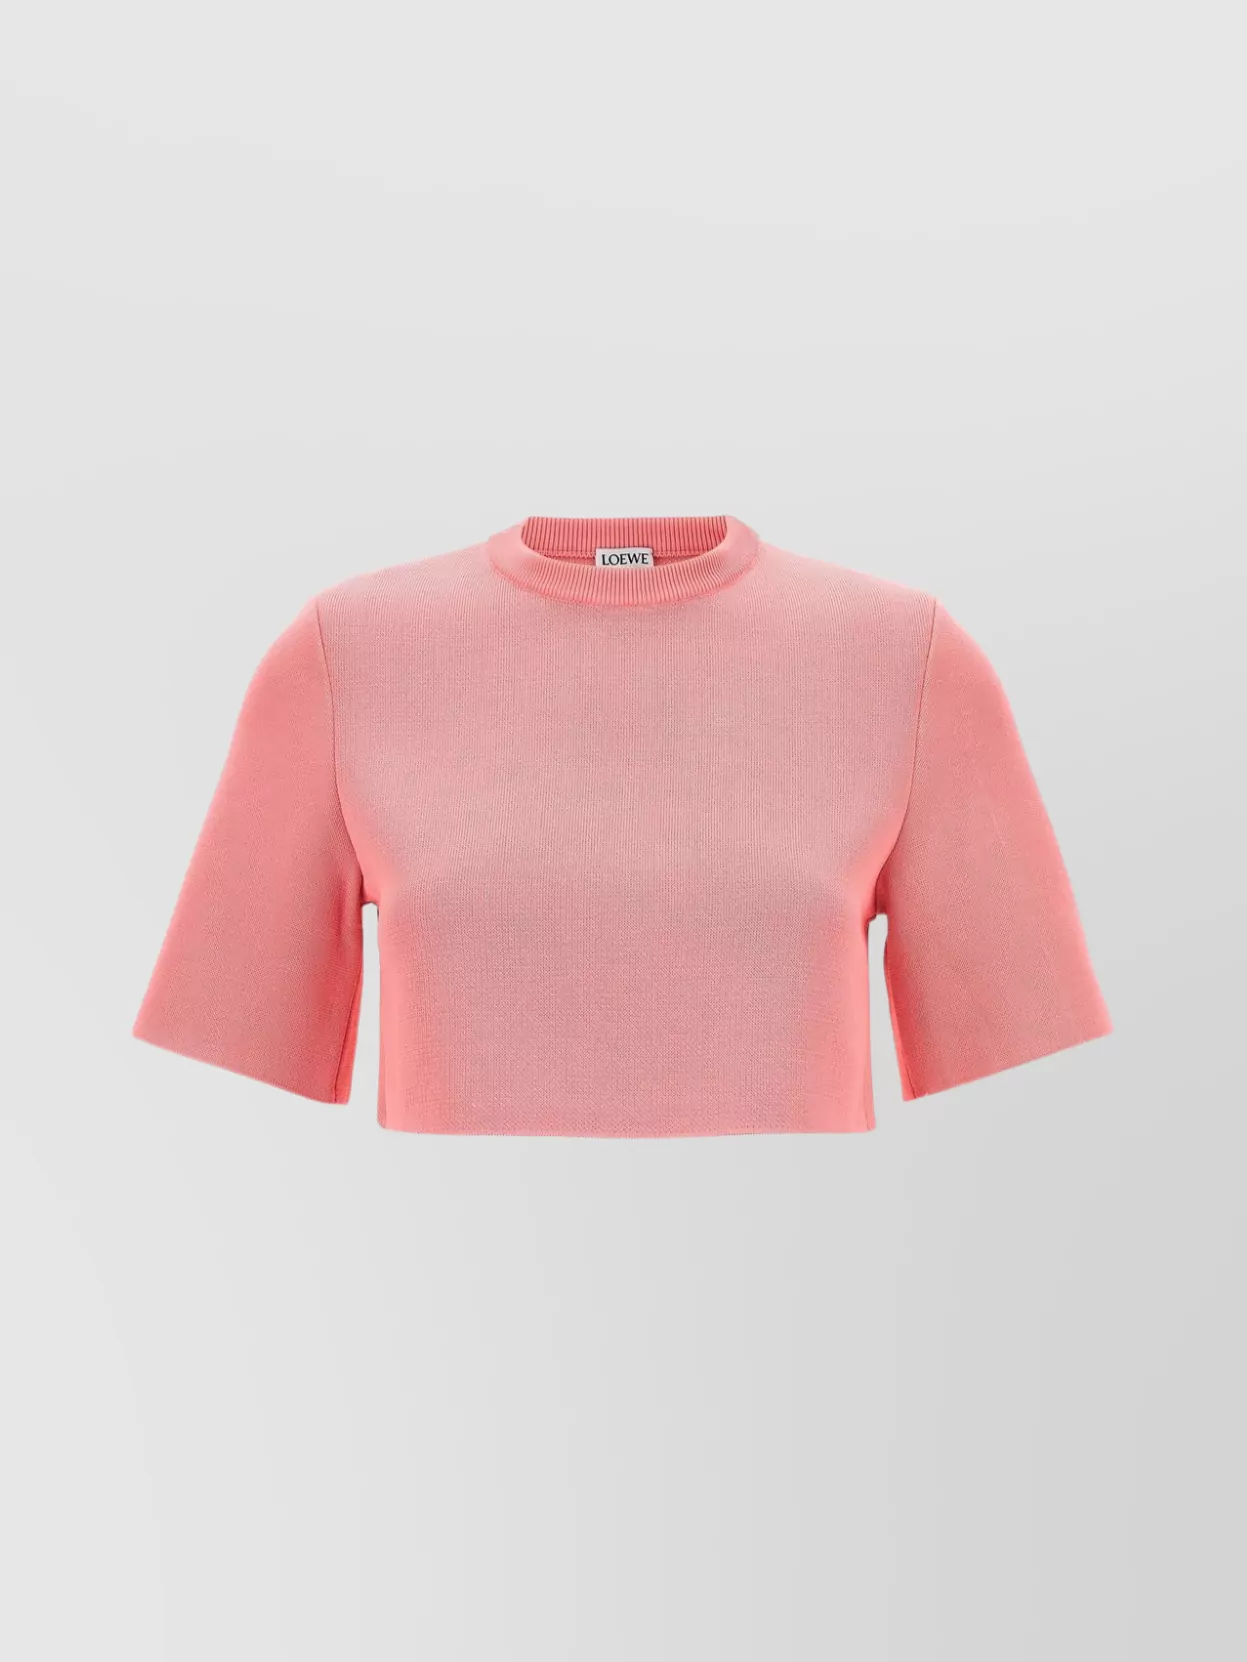 Loewe Crew Neck Cropped Top In Pink